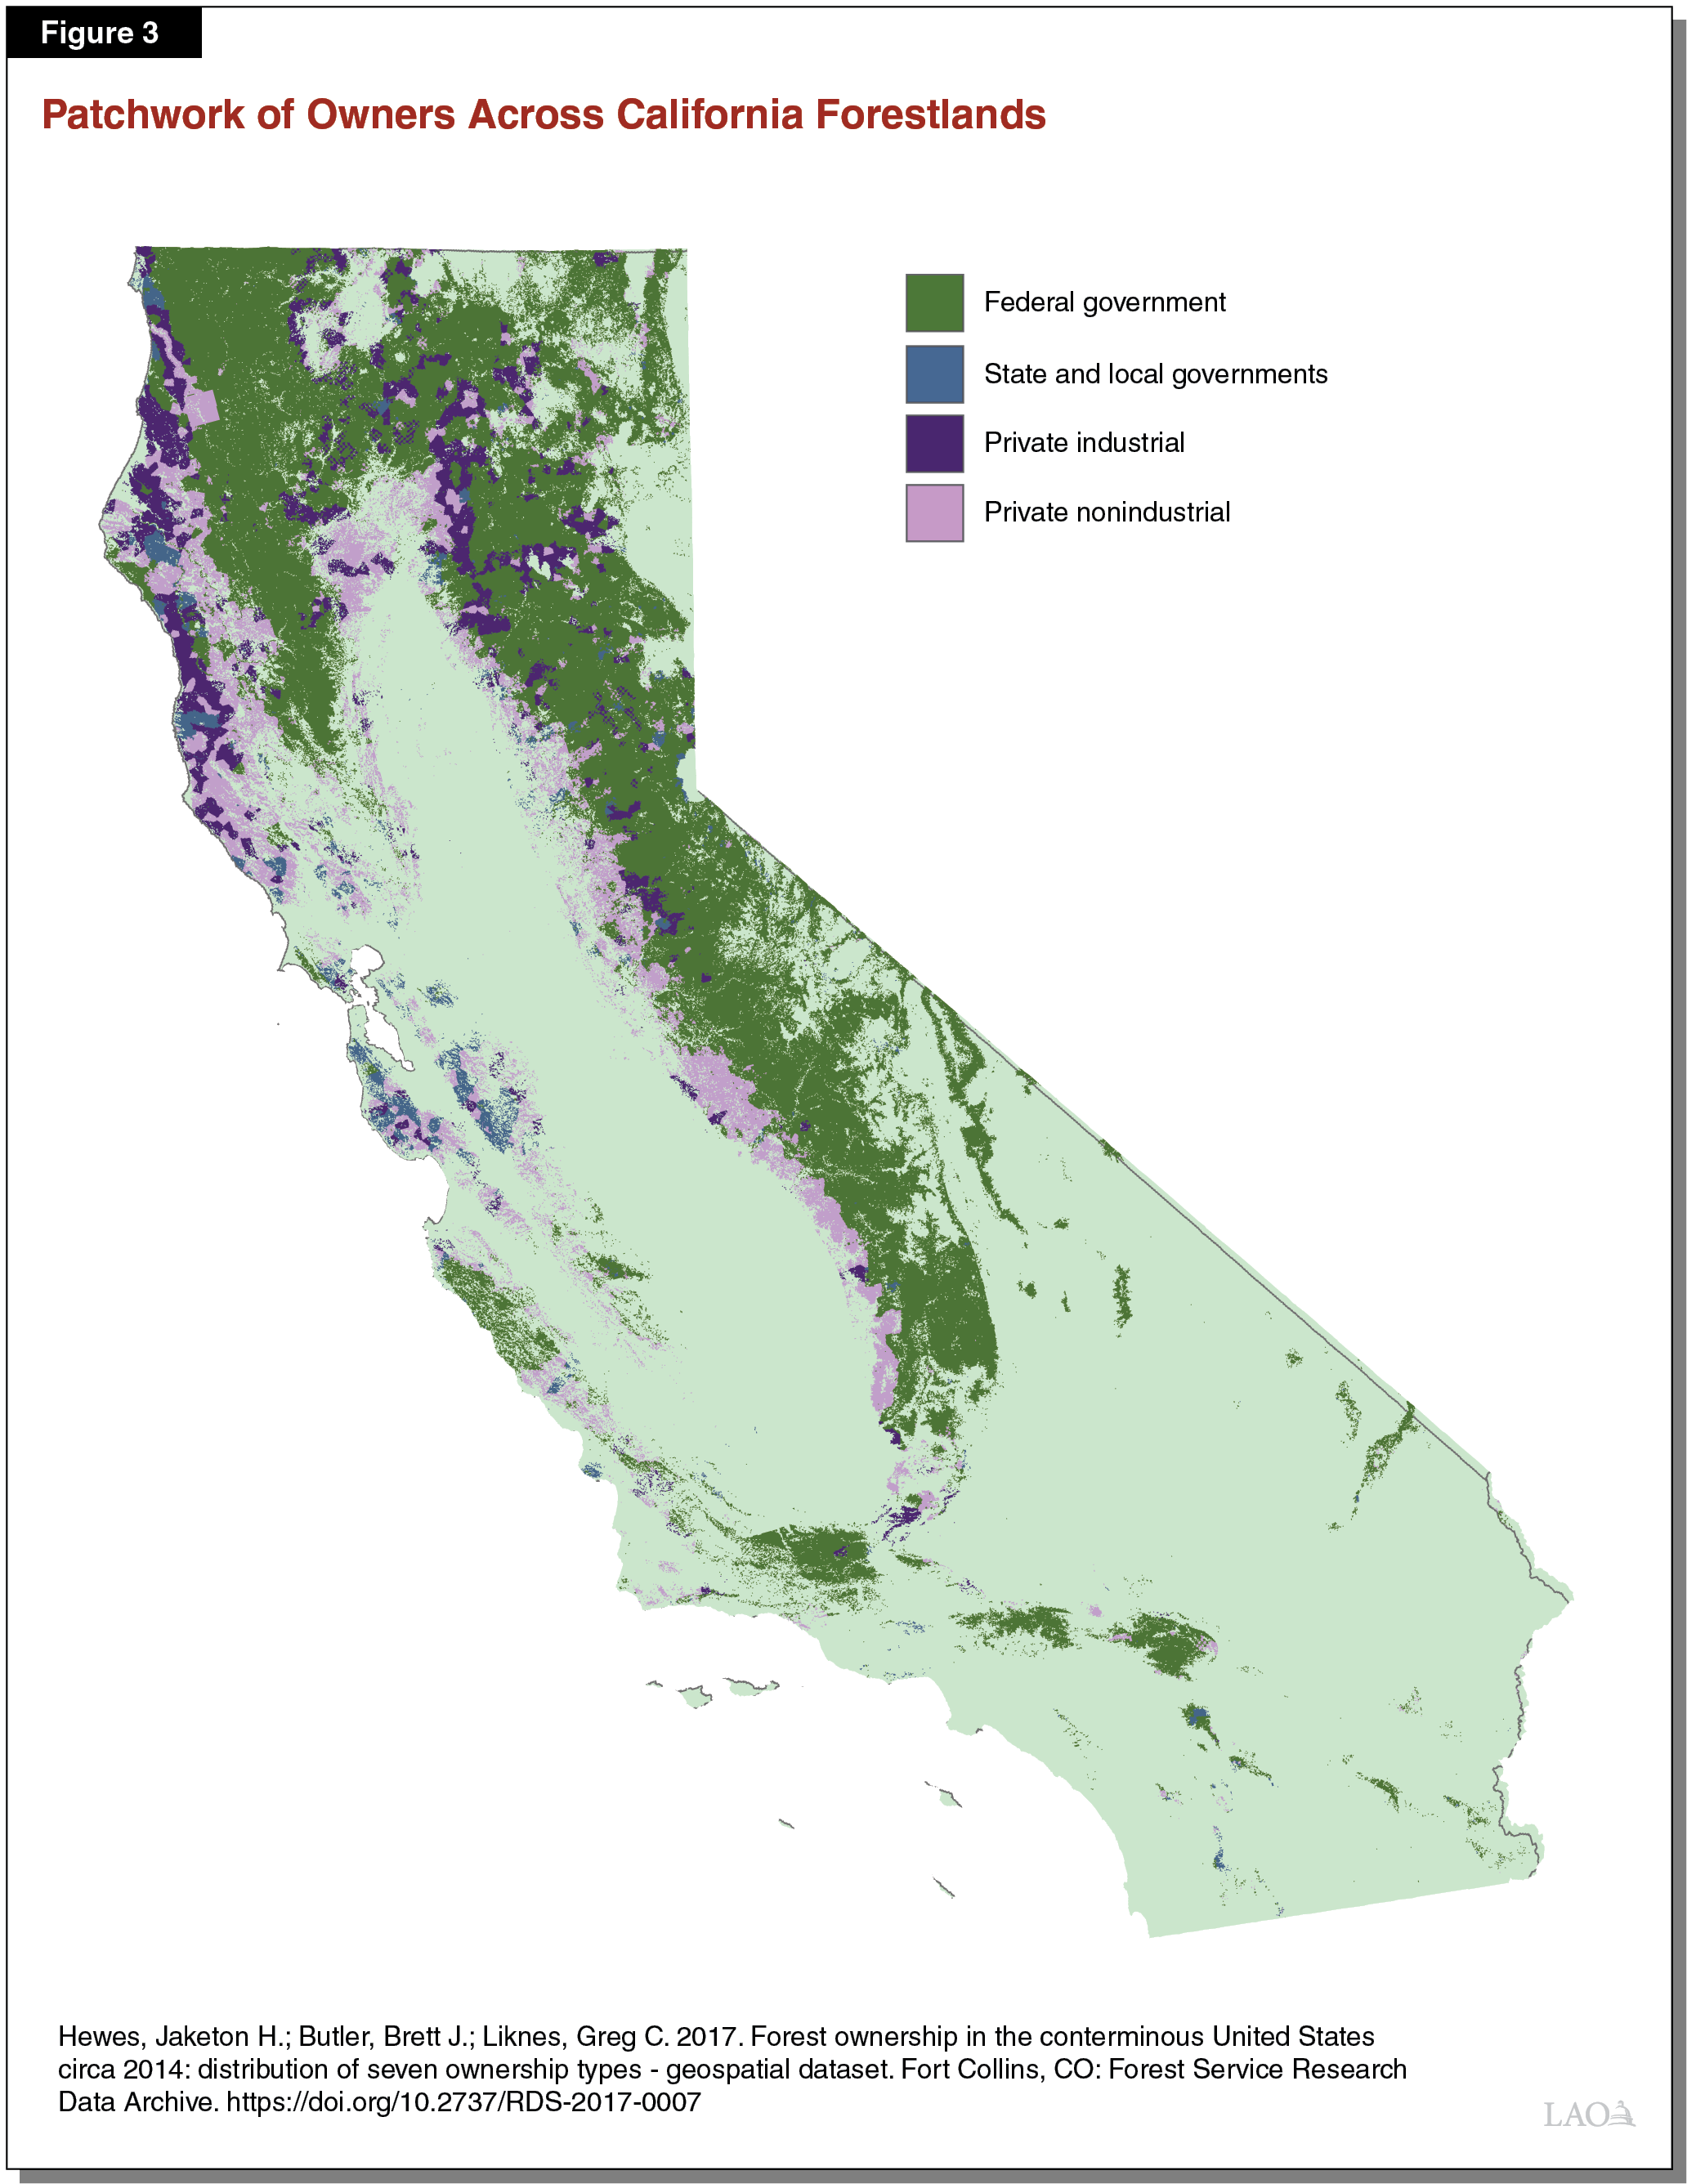 Figure 3 - Patchwork of Owners Across California Forestlands